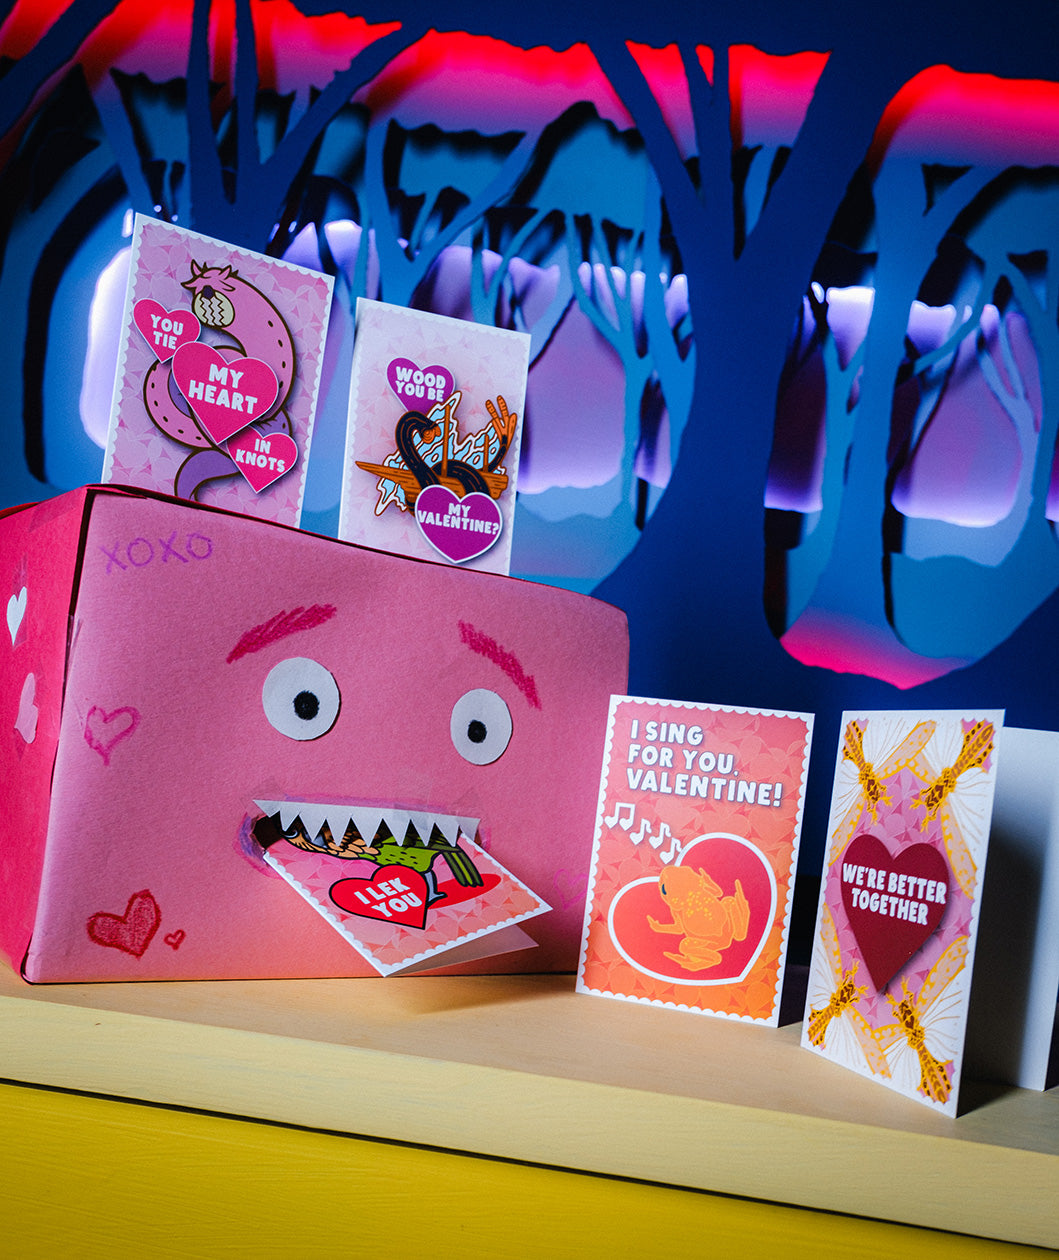 Bizarre Beasts Valentine's Day Cards in an elementary-school style mailbox with a beastly face.